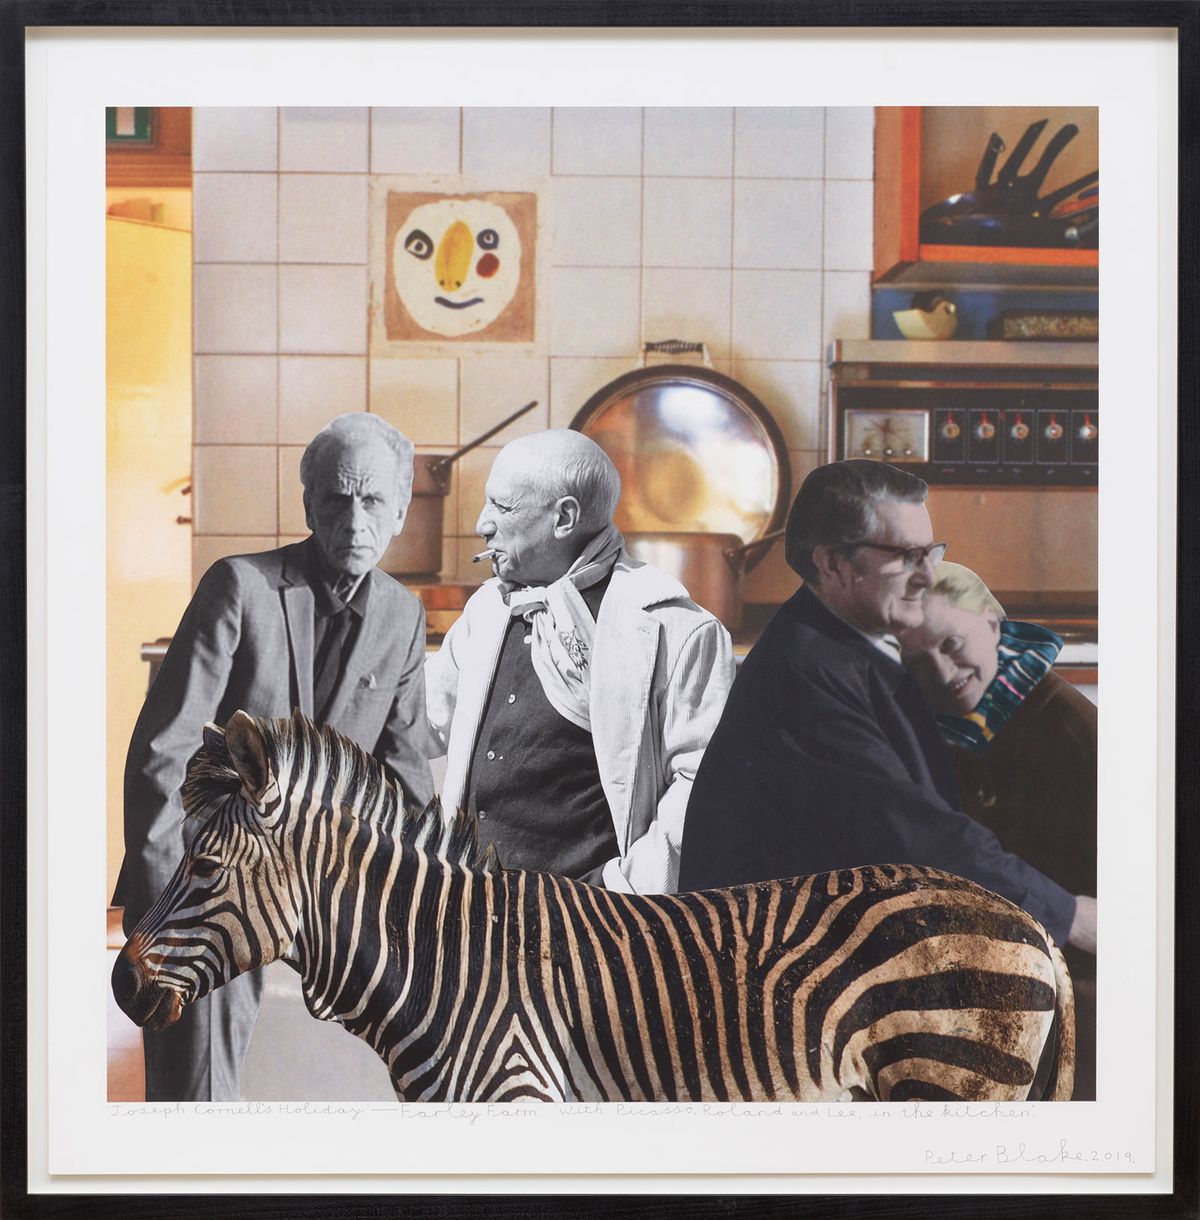 Peter Blake's Joseph Cornell’s Holiday – England, Farley Farm. With Picasso, Roland and Lee in the kitchen (2019) Courtesy the artist and Waddington Custot